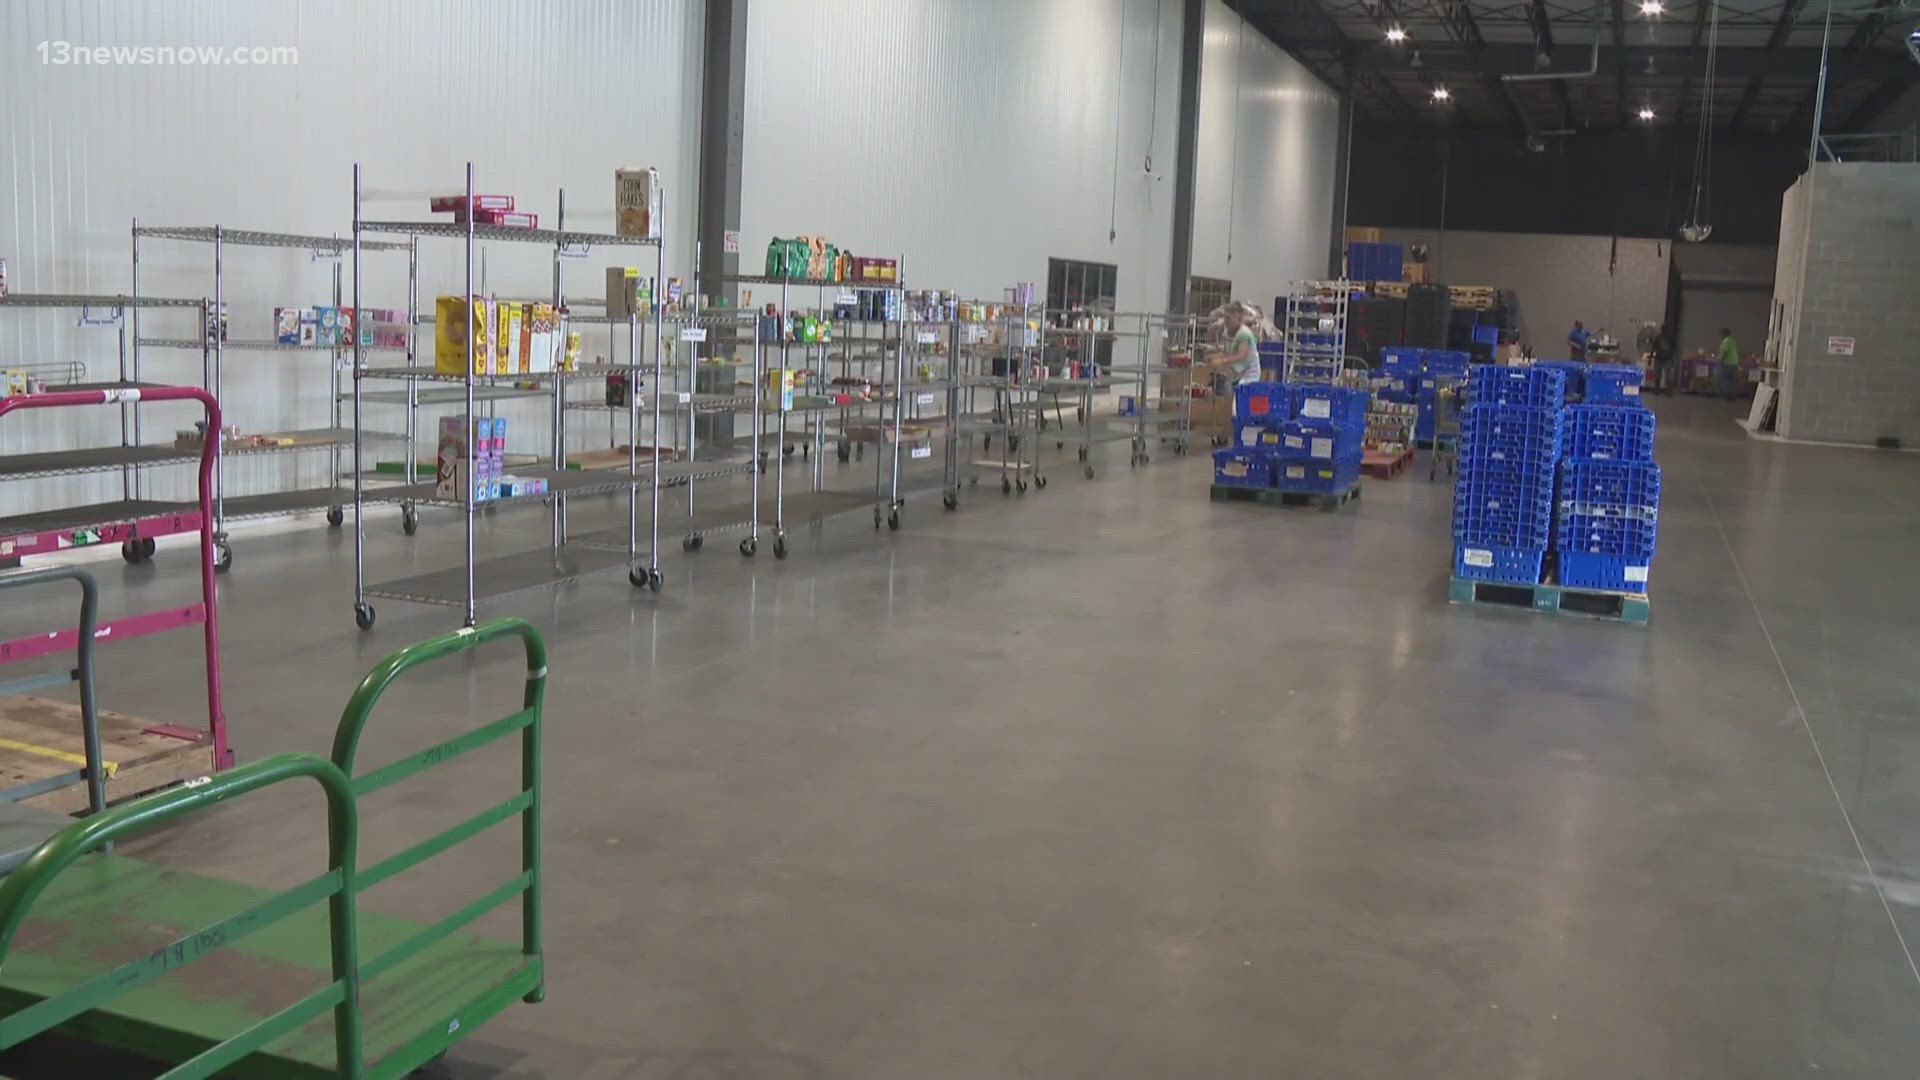 The Virginia Peninsula Foodbank is strongly encouraging the community to donate due to a lack of food to give out.